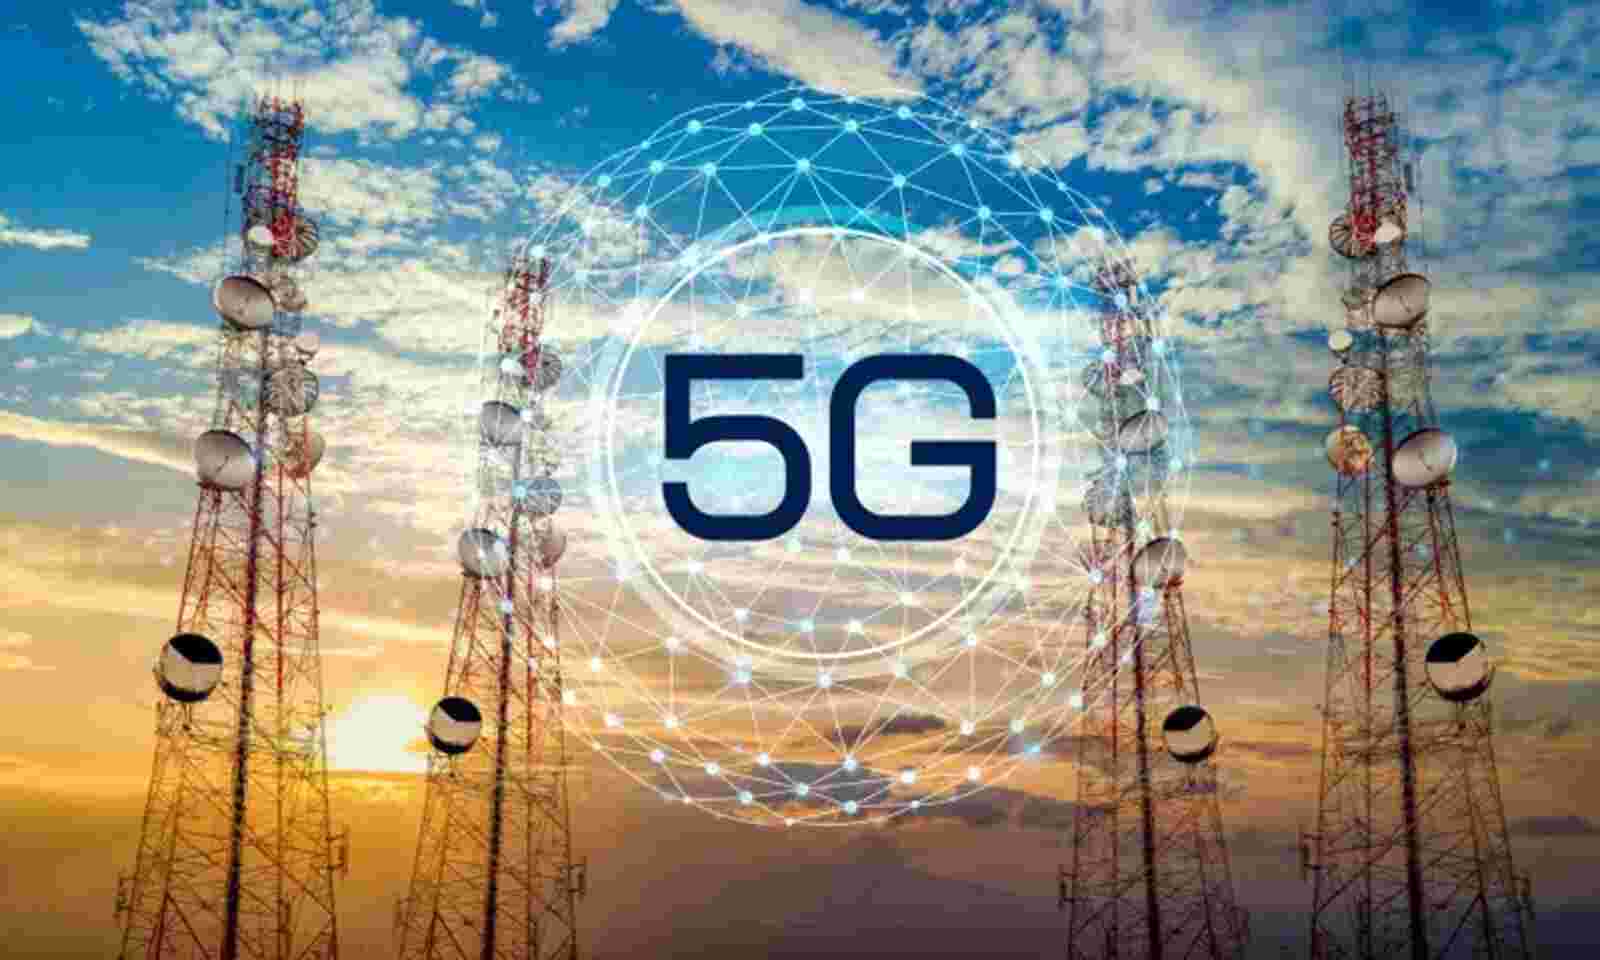 The Future Of Technology 5G And What It Means For Humanity